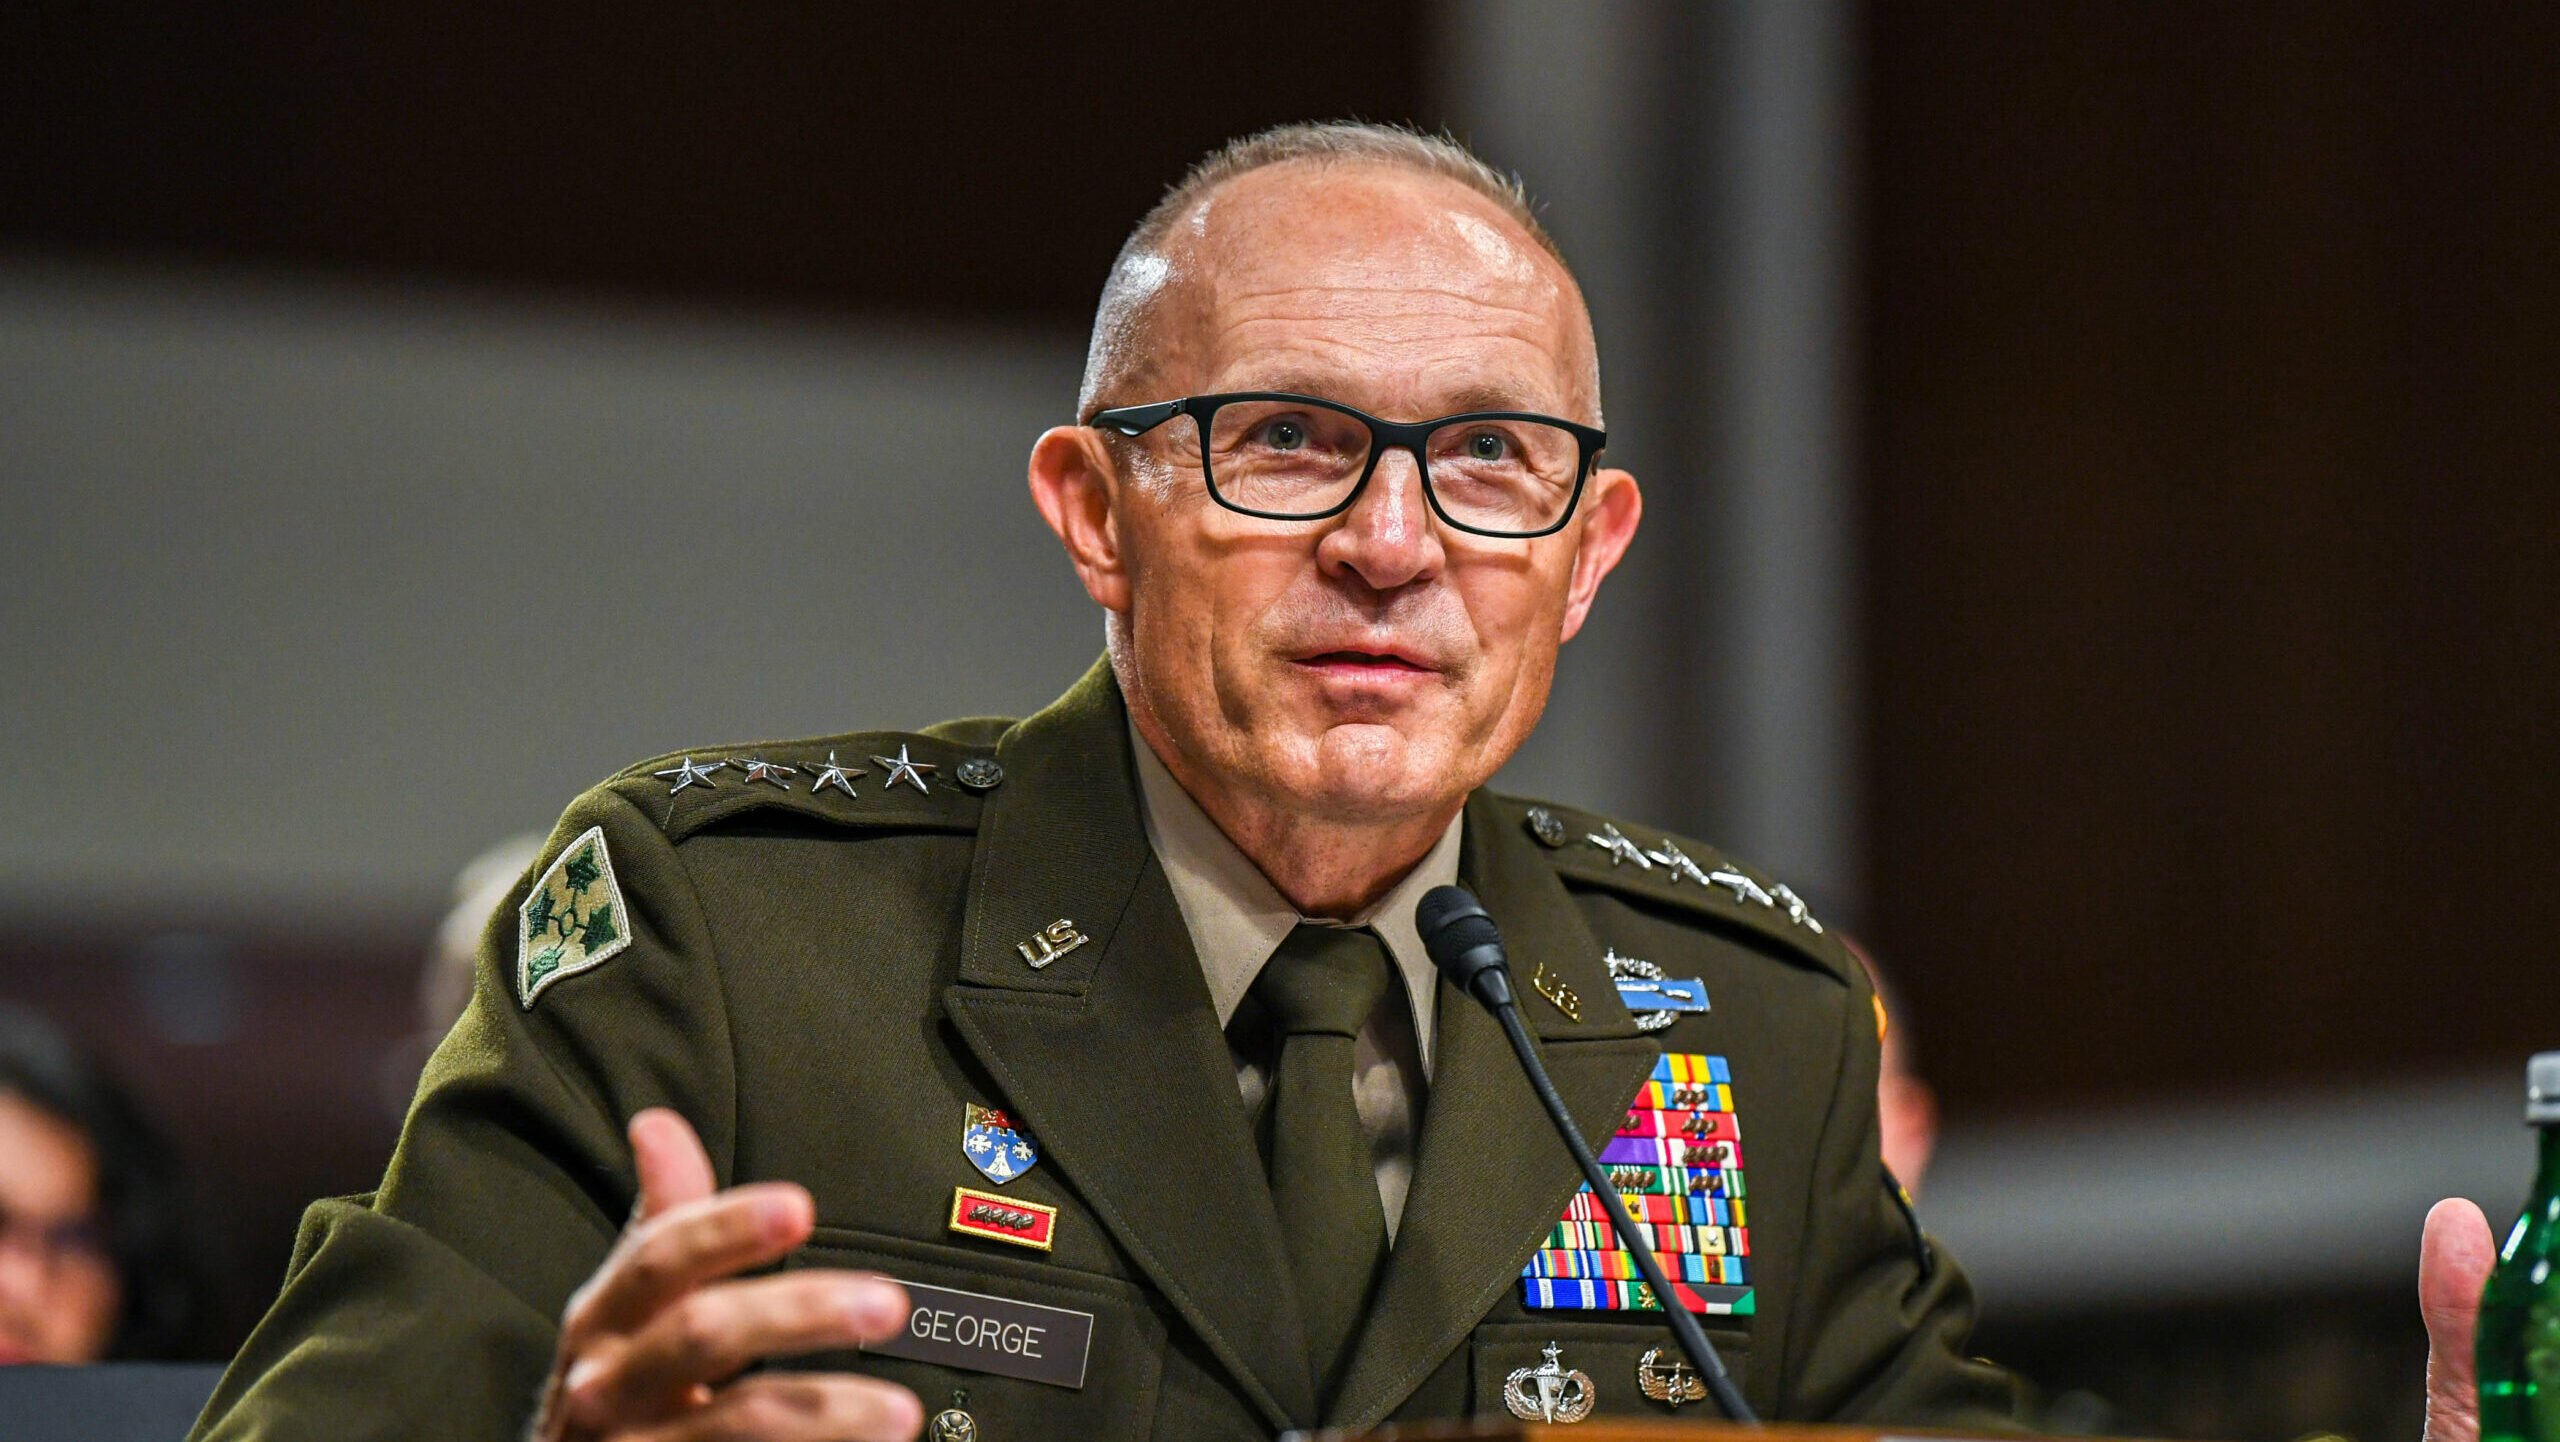 New Army chief, looming force structure shakeups and new weapons: Army 2023 in review